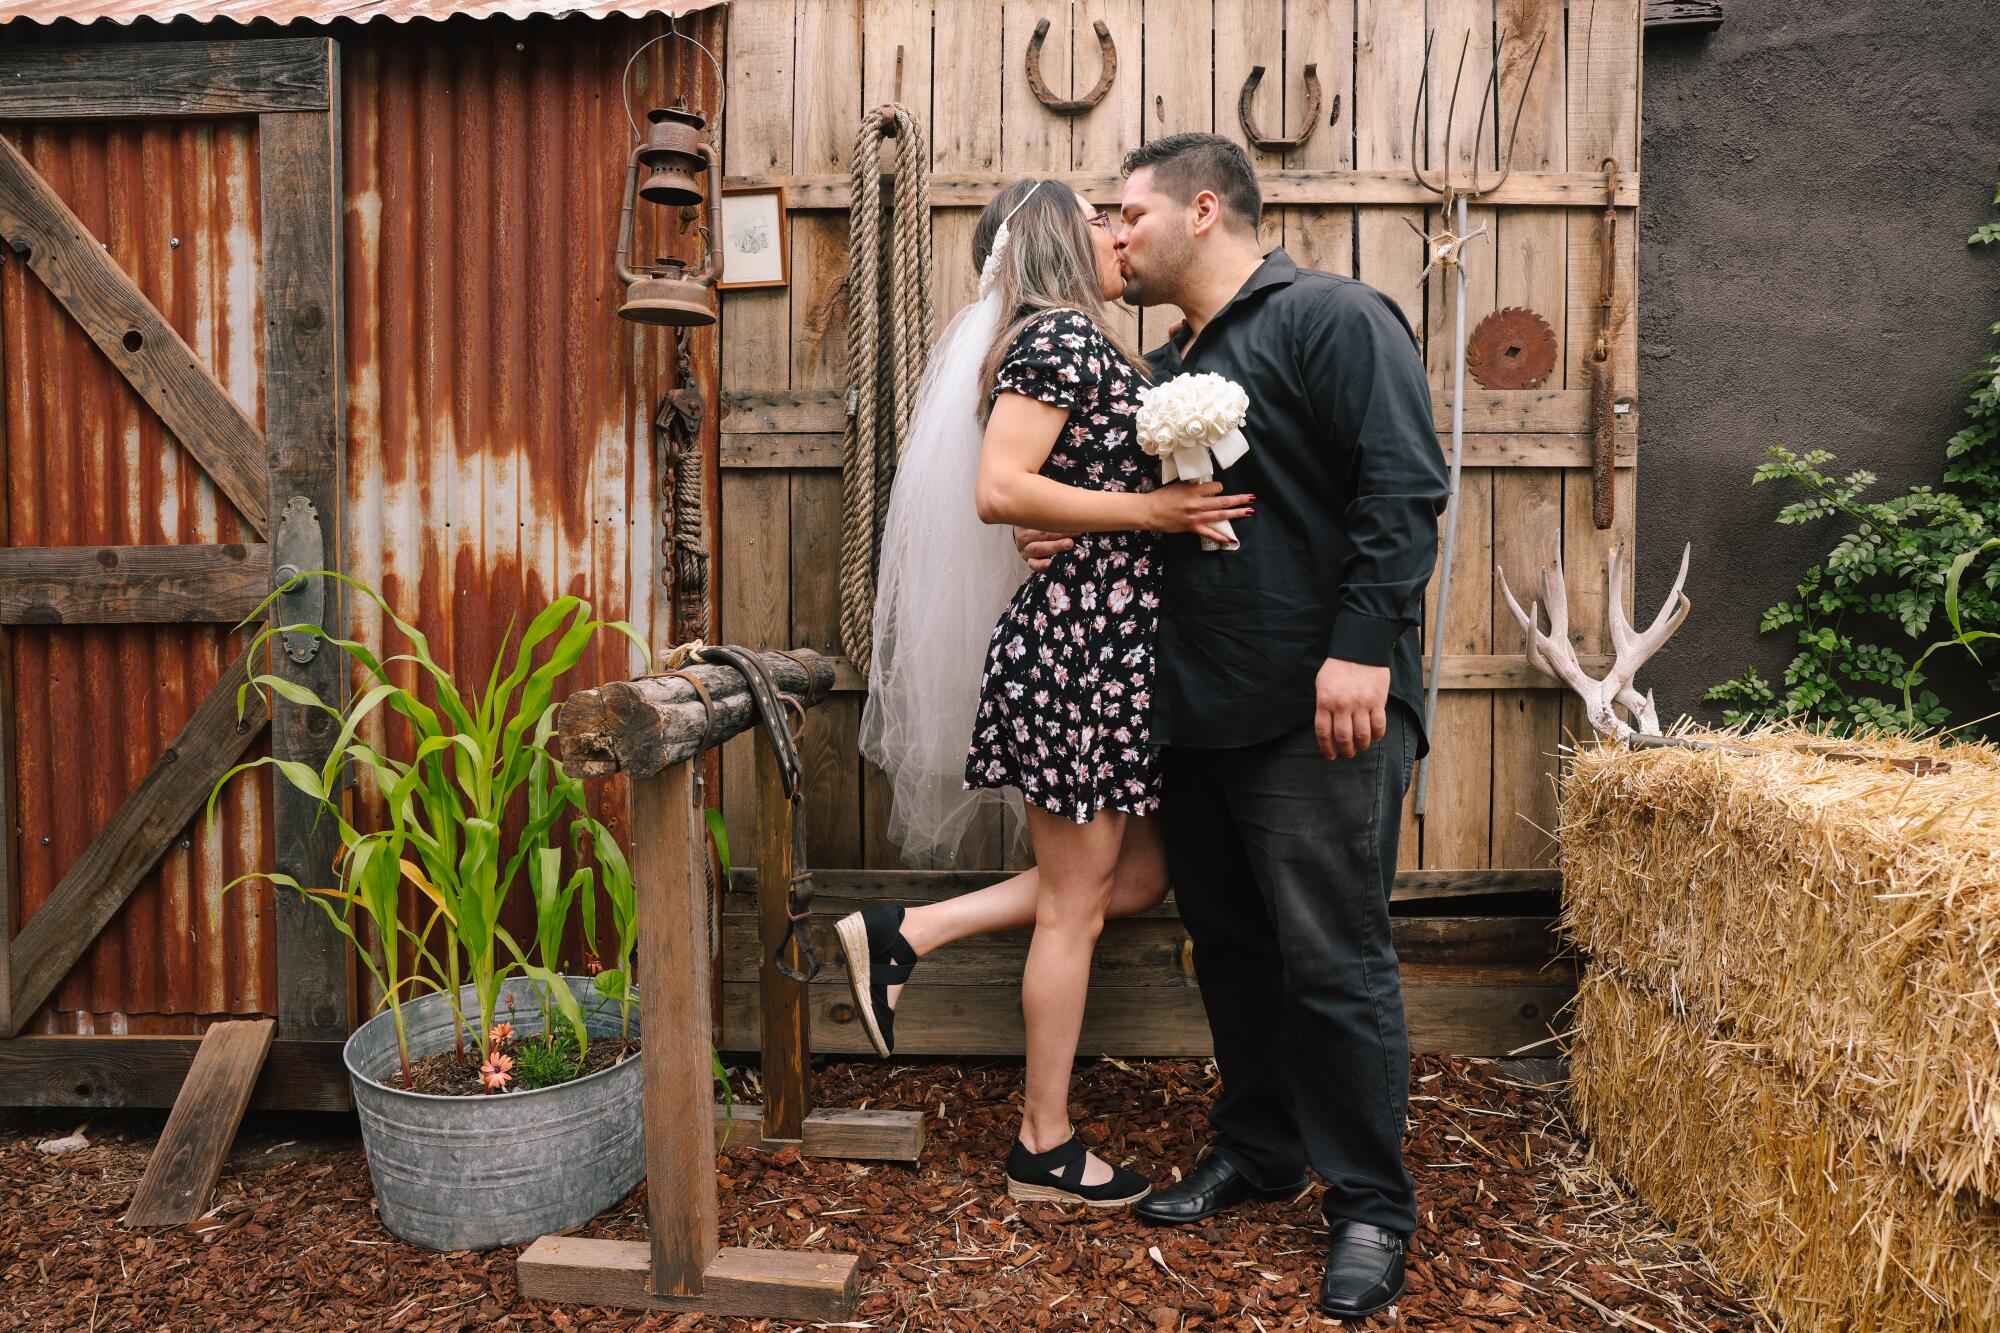 A woman and a man kiss in front of a farmhouse-themed wall